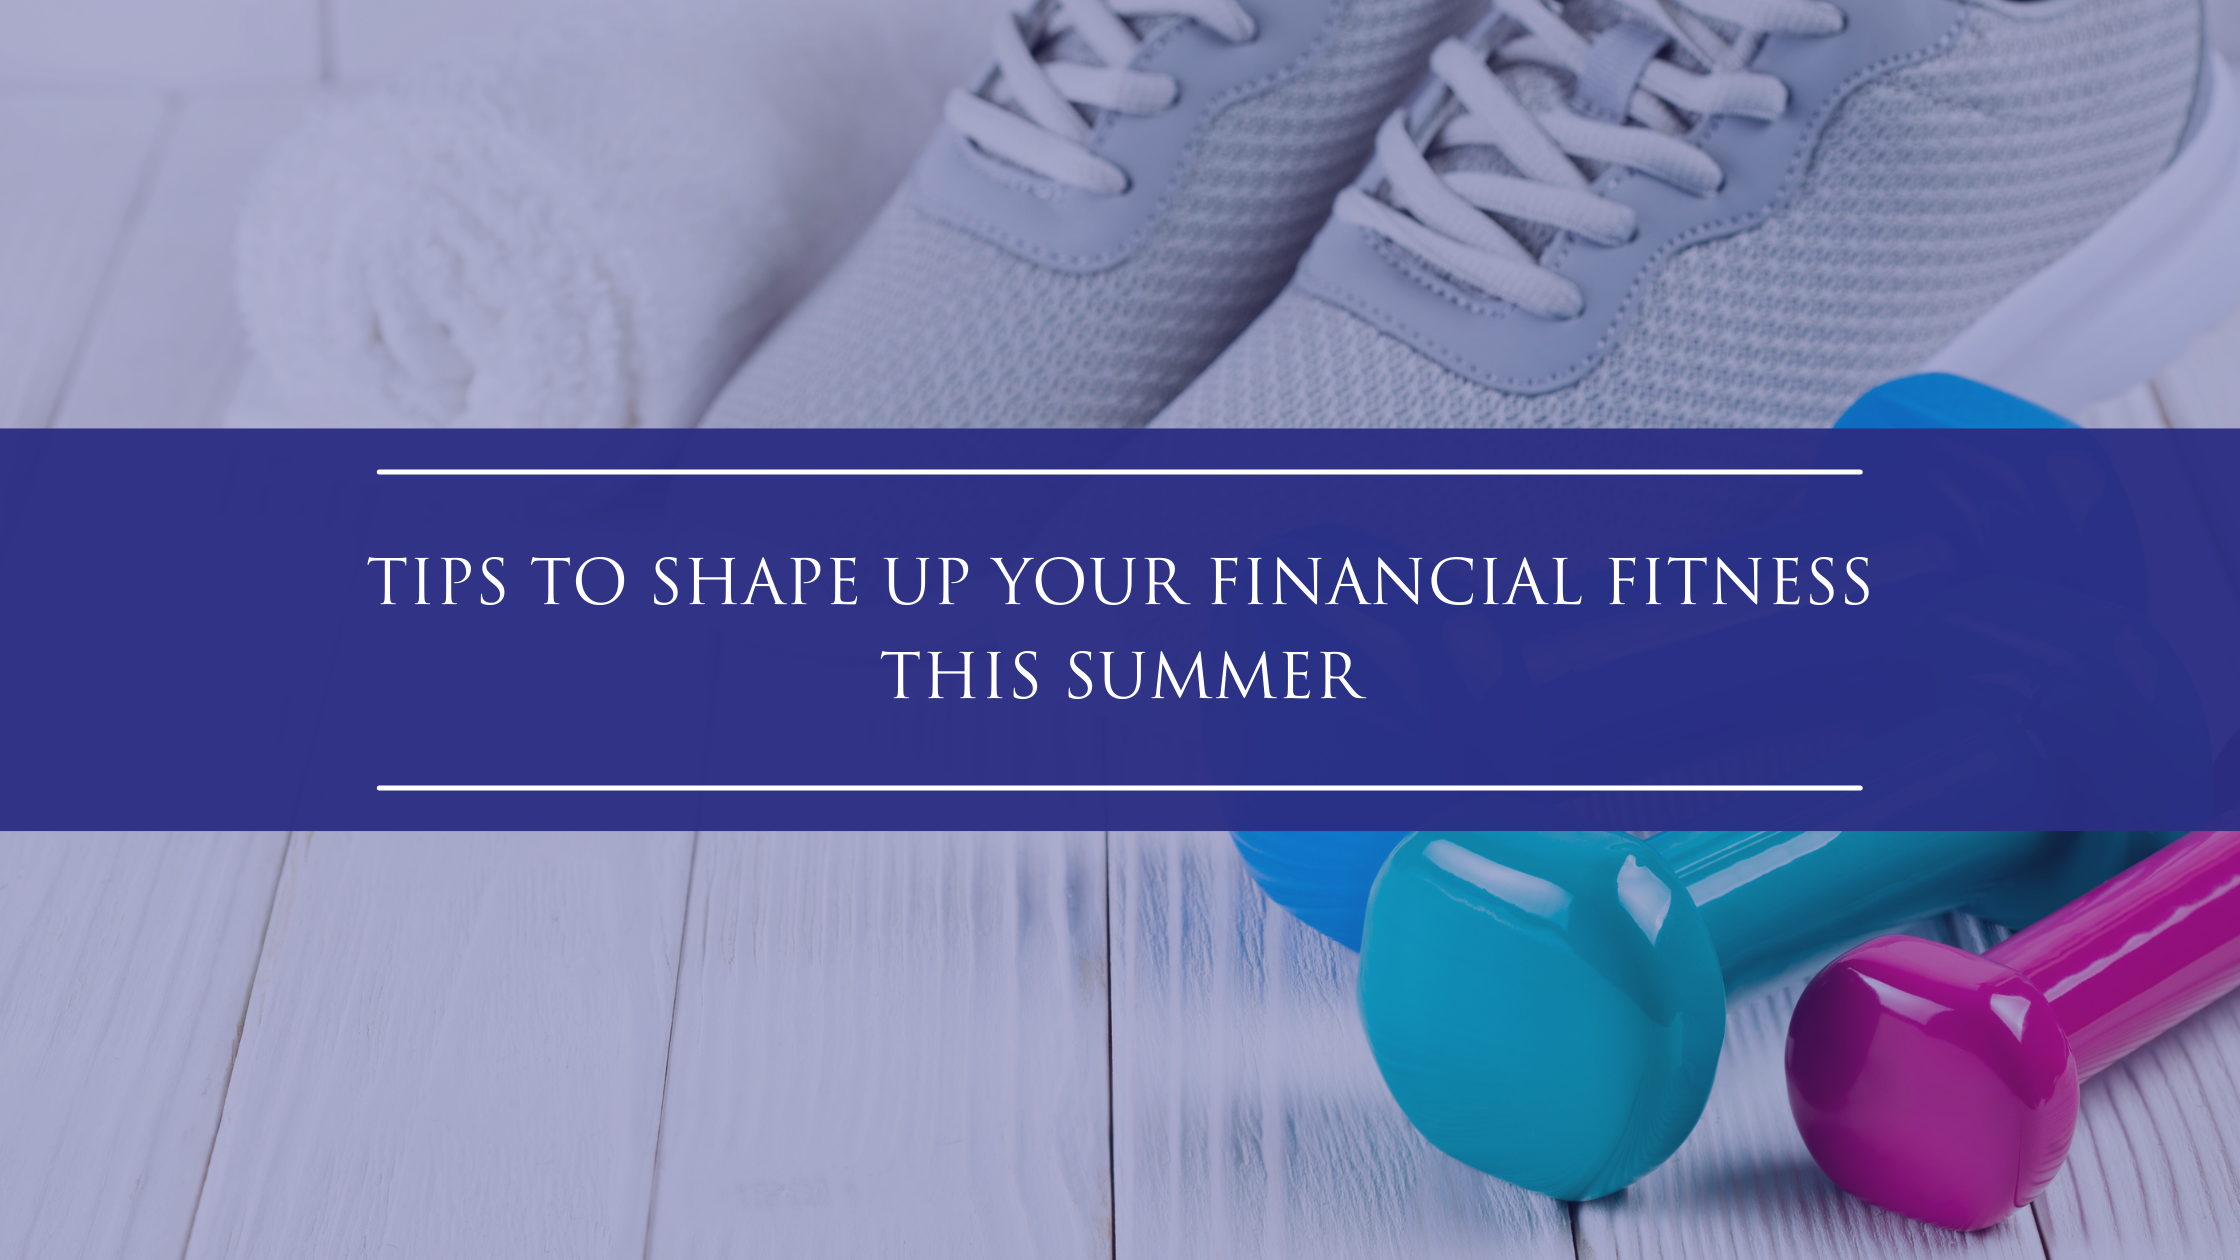 Tips to Shape Up Your Fiscal Fitness this Summer